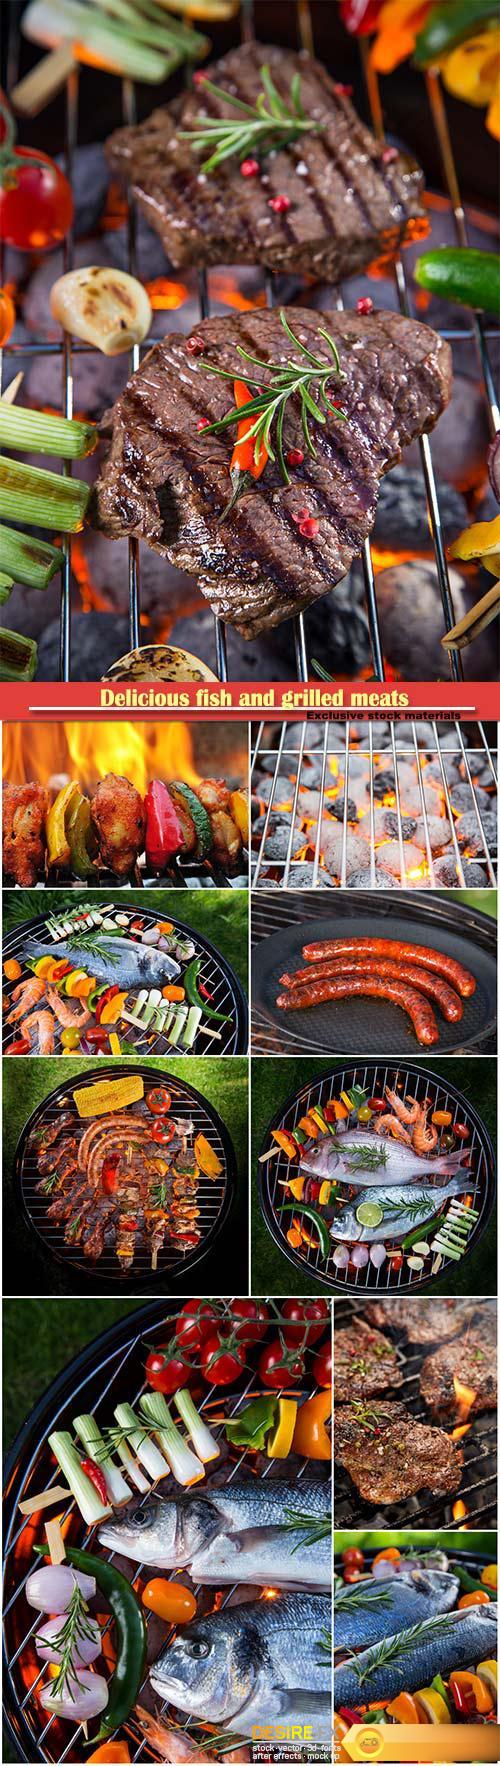 Delicious fish and grilled meats with vegetables